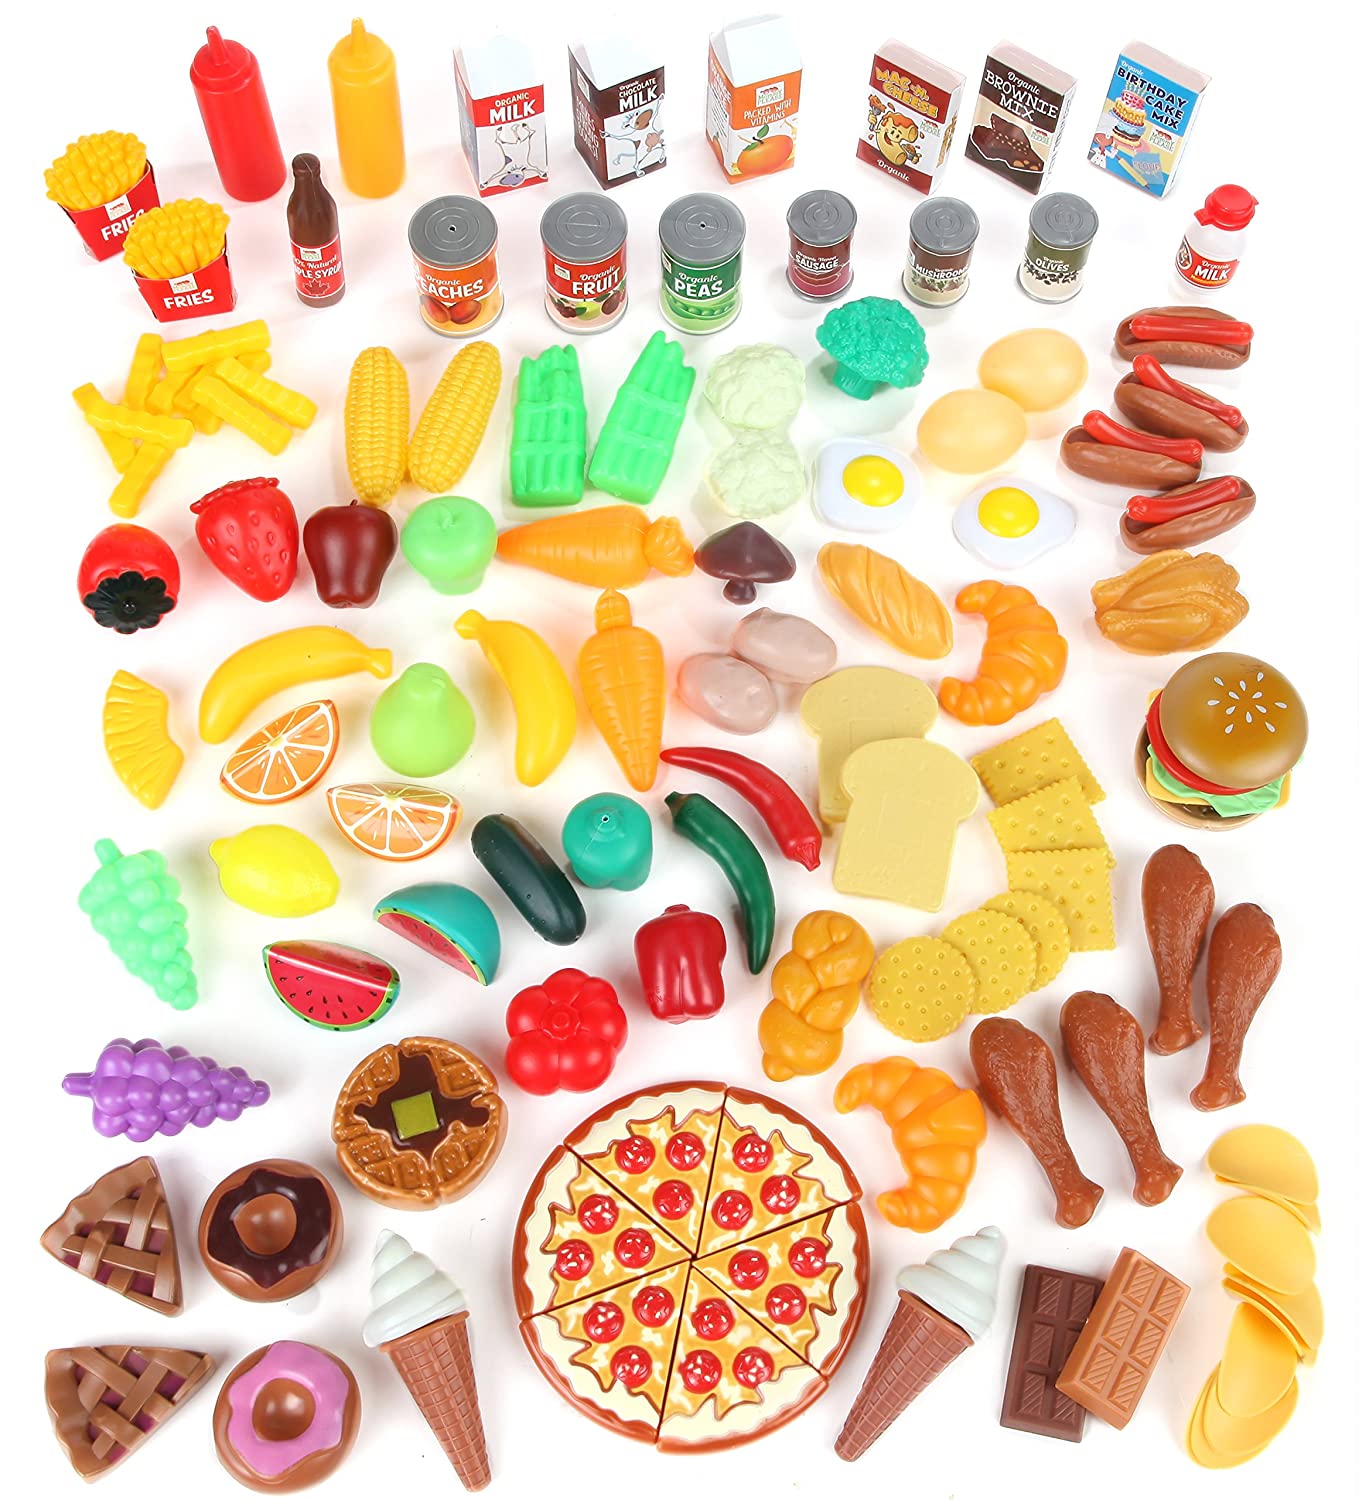 Play Food Set for Kids & Toy Food for Pretend Play